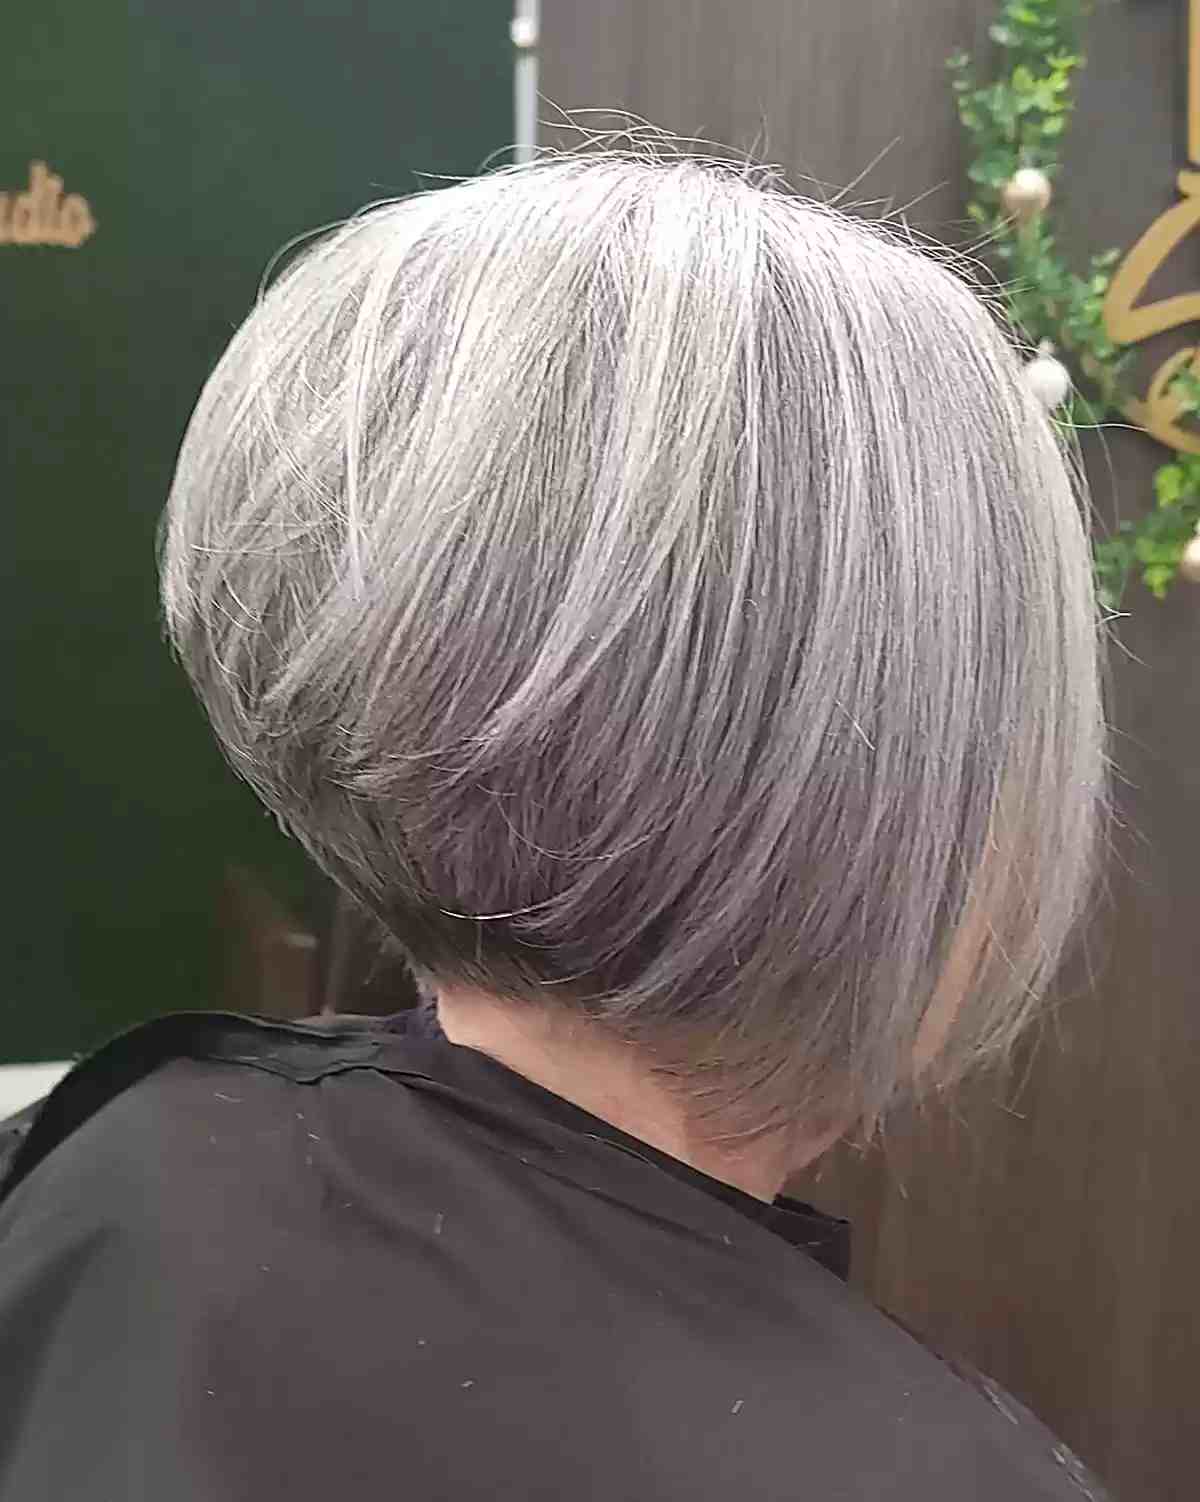 Short Rounded Wedge Bob Haircut for Older ladies over 50